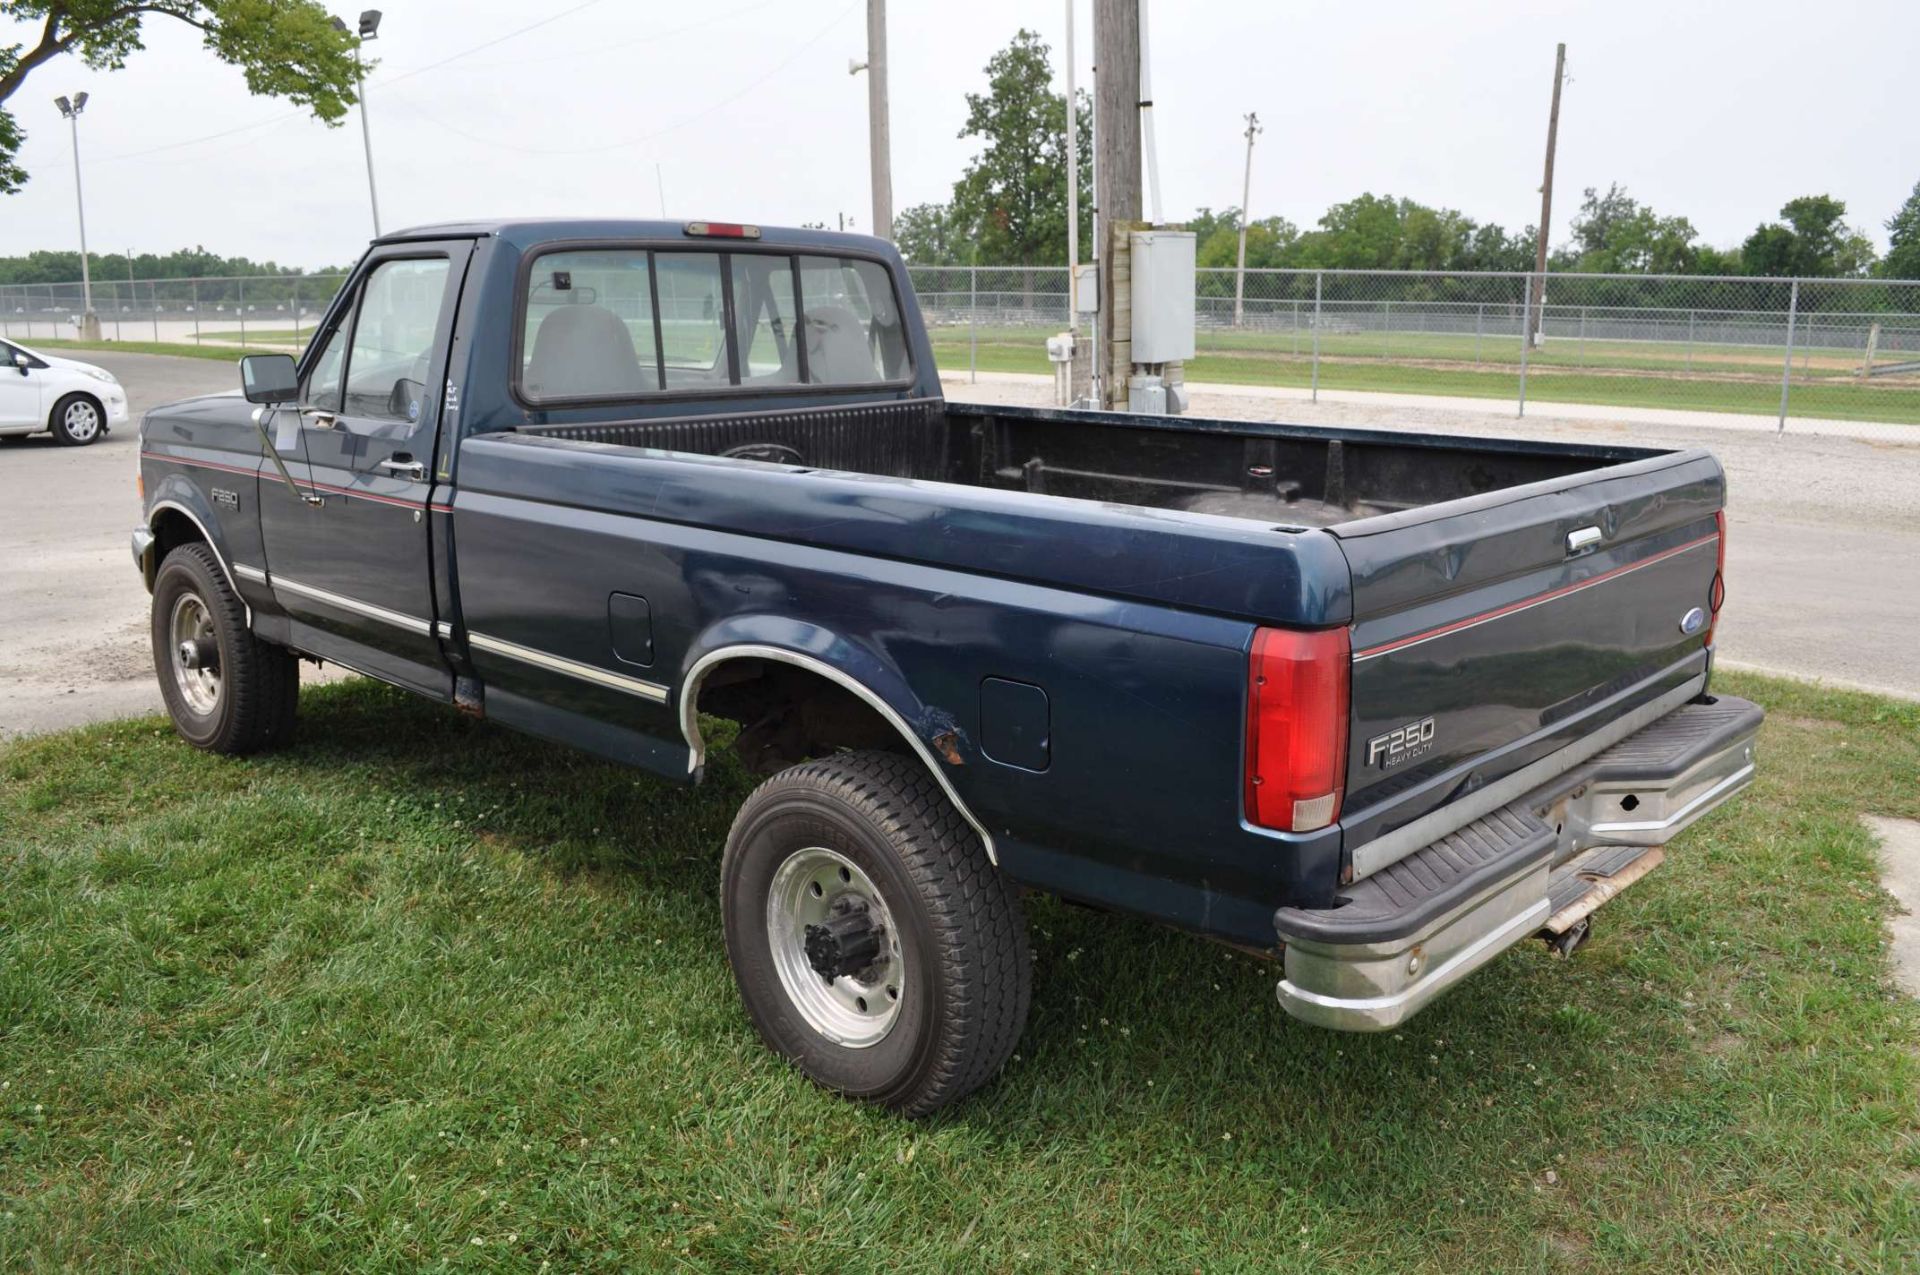 Ford F250 pickup truck, reg cab, long bed, 4x4, gas, automatic - Image 4 of 13